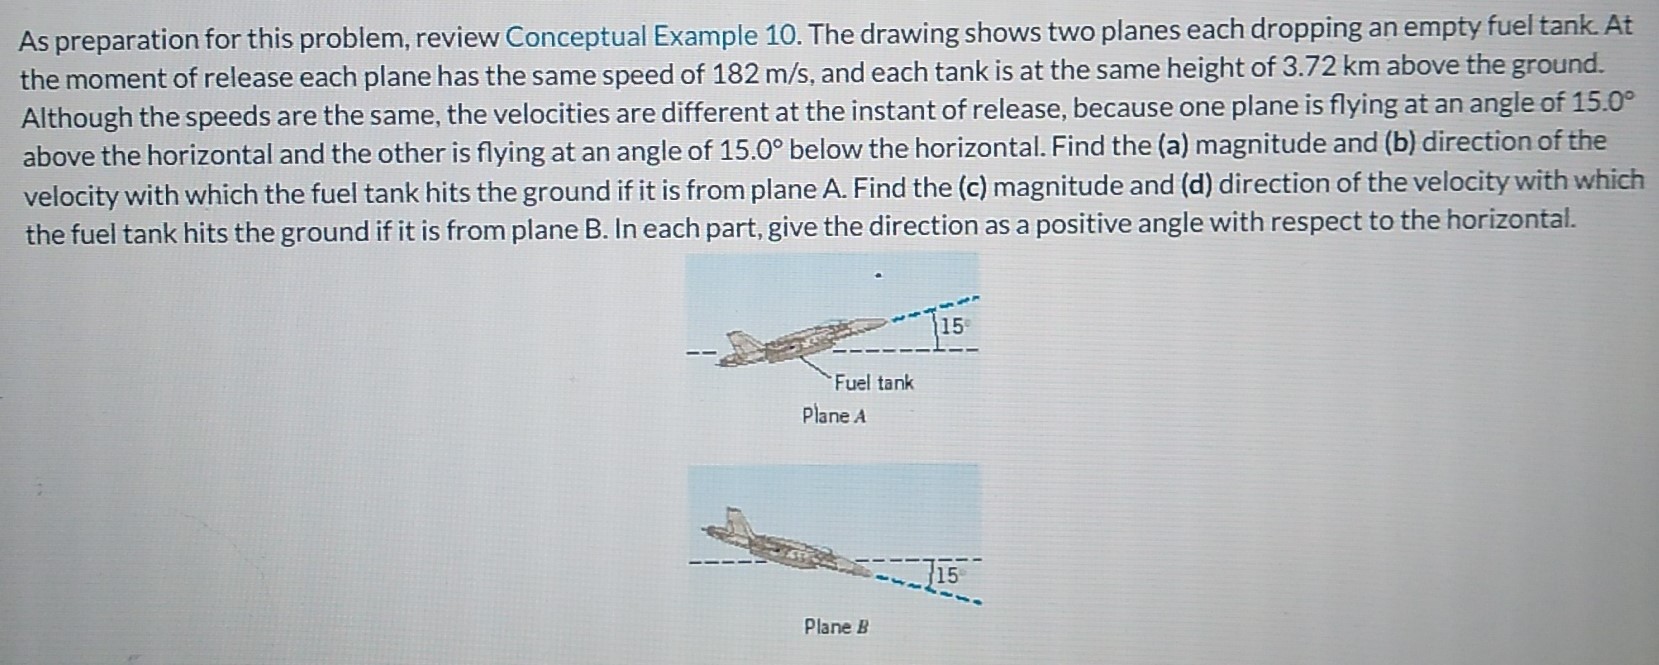 As preparation for this problem, review Conceptual Example 10. The drawing shows two planes each dropping an empty fuel tank. At the moment of release each plane has the same speed of 182 m/s, and each tank is at the same height of 3.72 km above the ground. Although the speeds are the same, the velocities are different at the instant of release, because one plane is flying at an angle of 15.0∘ above the horizontal and the other is flying at an angle of 15.0∘ below the horizontal. Find the (a) magnitude and (b) direction of the velocity with which the fuel tank hits the ground if it is from plane A. Find the (c) magnitude and (d) direction of the velocity with which the fuel tank hits the ground if it is from plane B. In each part, give the direction as a positive angle with respect to the horizontal. Plane B